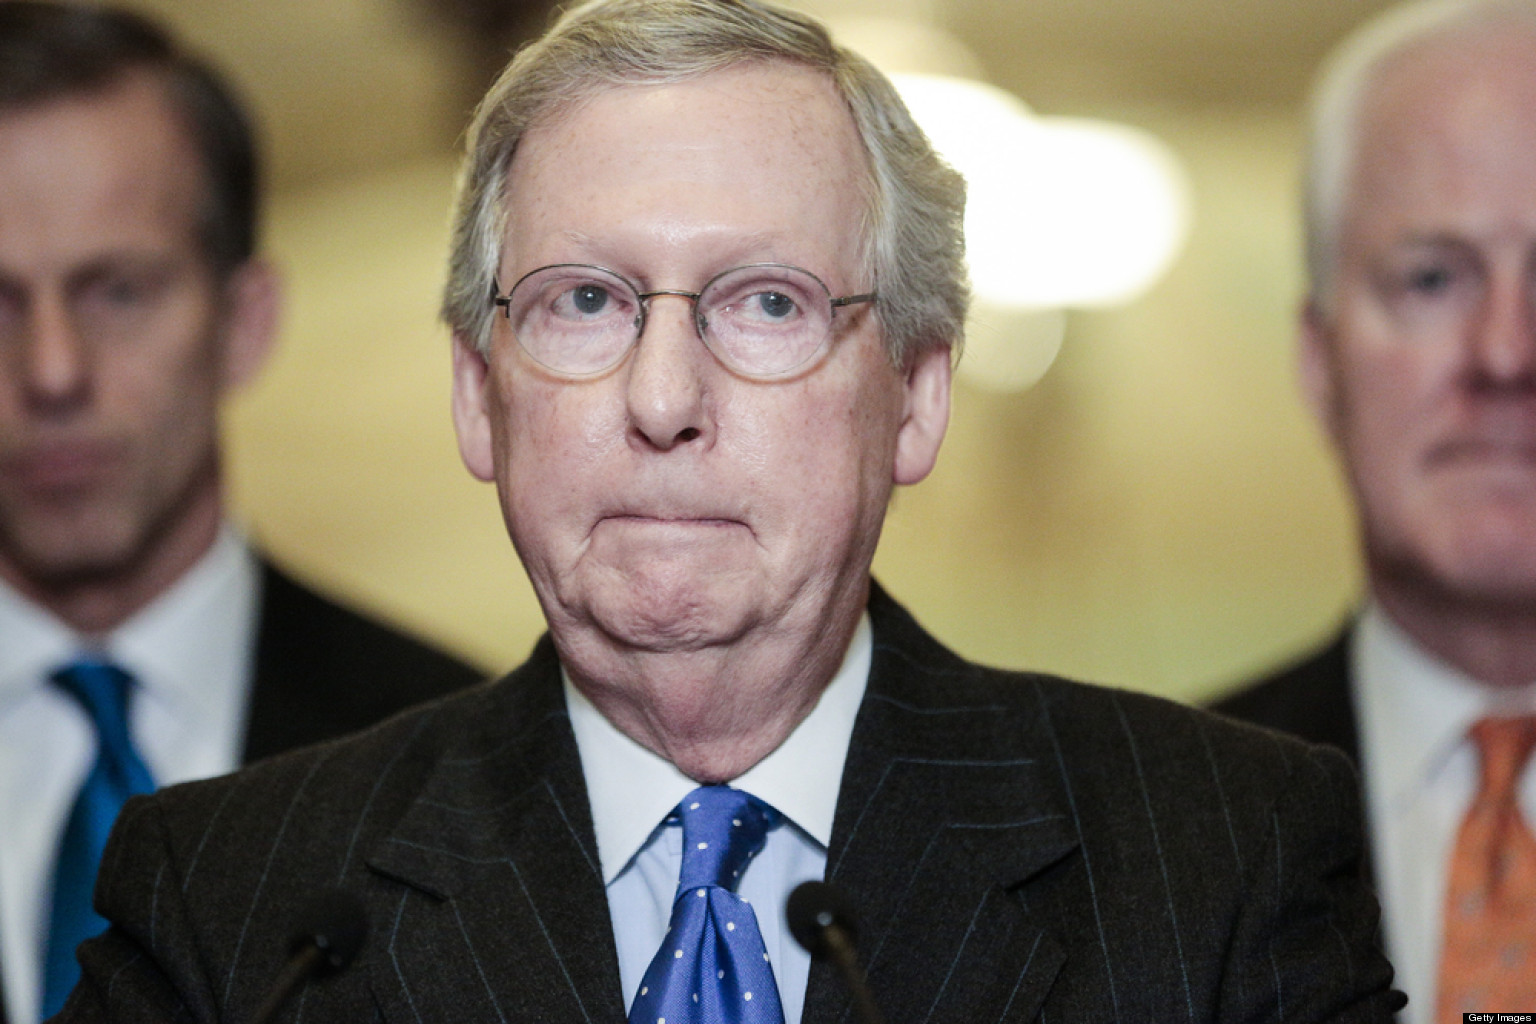 Mitch McConnell Hit With Ethics Complaint Over Leaked Ashley Judd Tape | HuffPost1536 x 1024